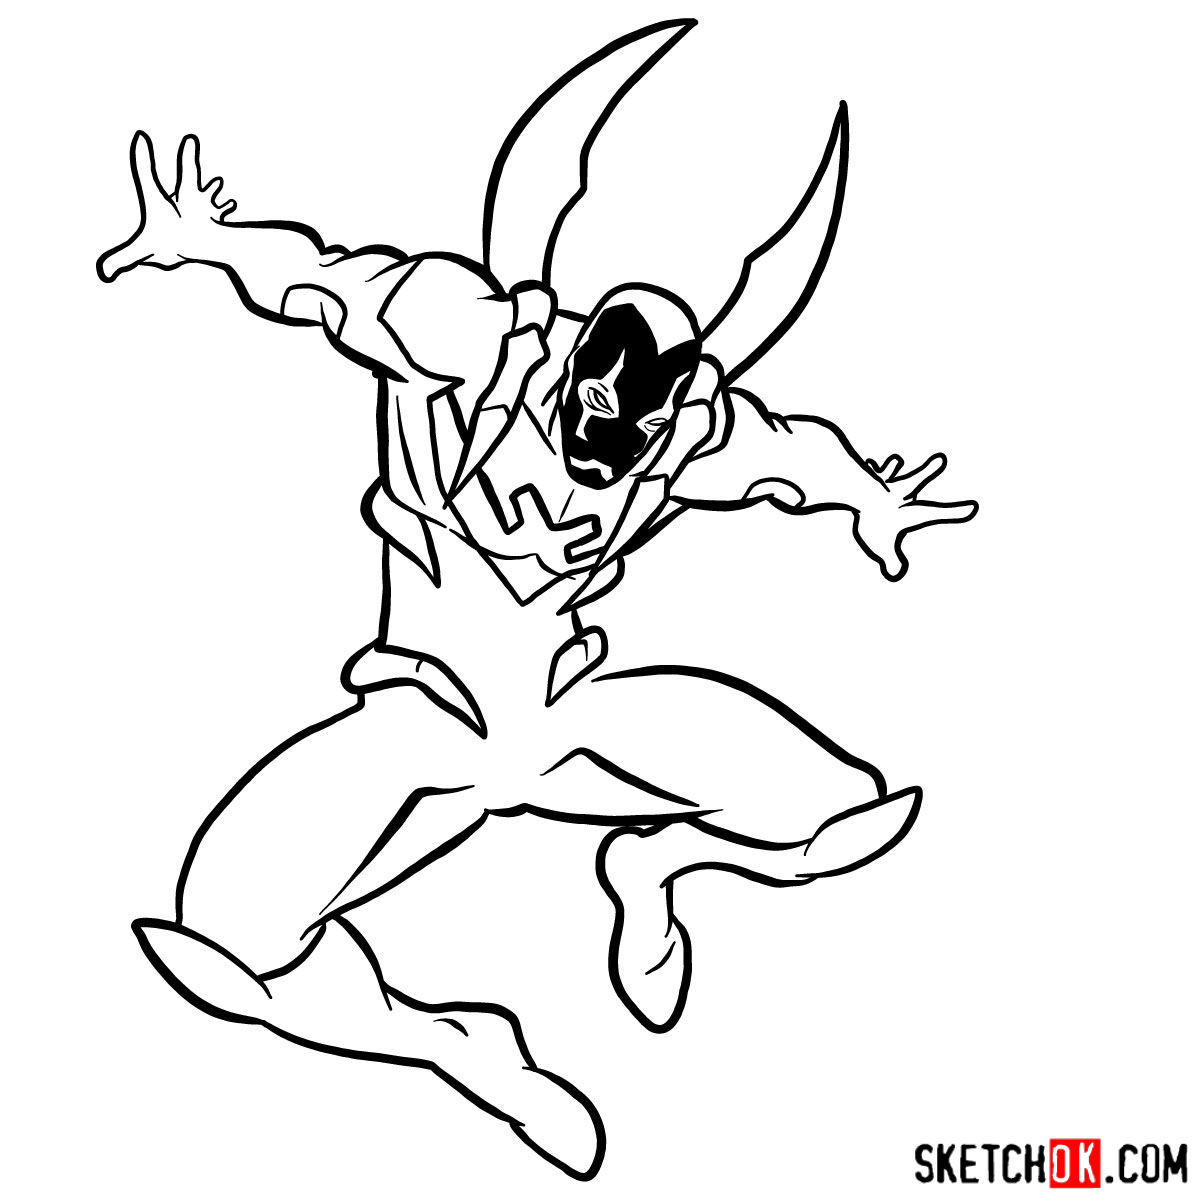 Learn How to Draw Blue Beetle from DC Comics in 14 Easy Steps